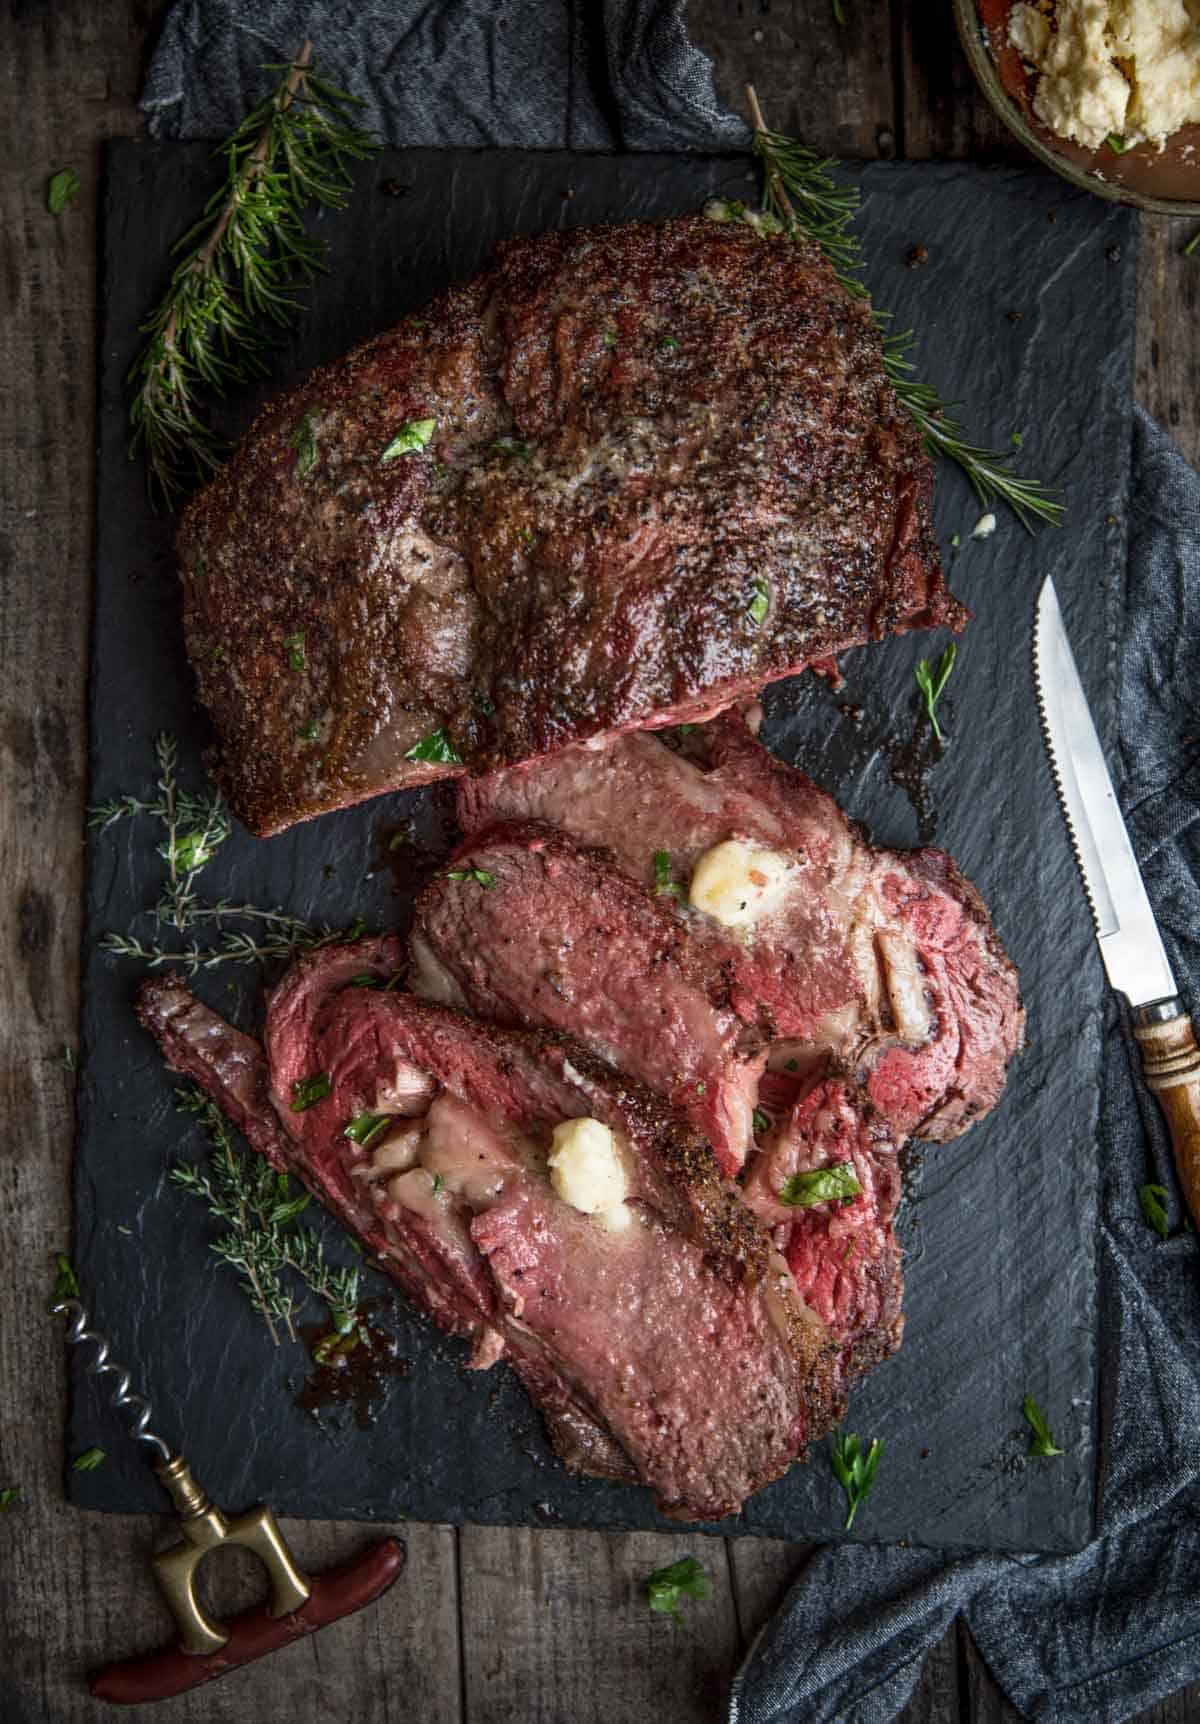 Smoked Prime Rib with horseradish butter on a serving platter